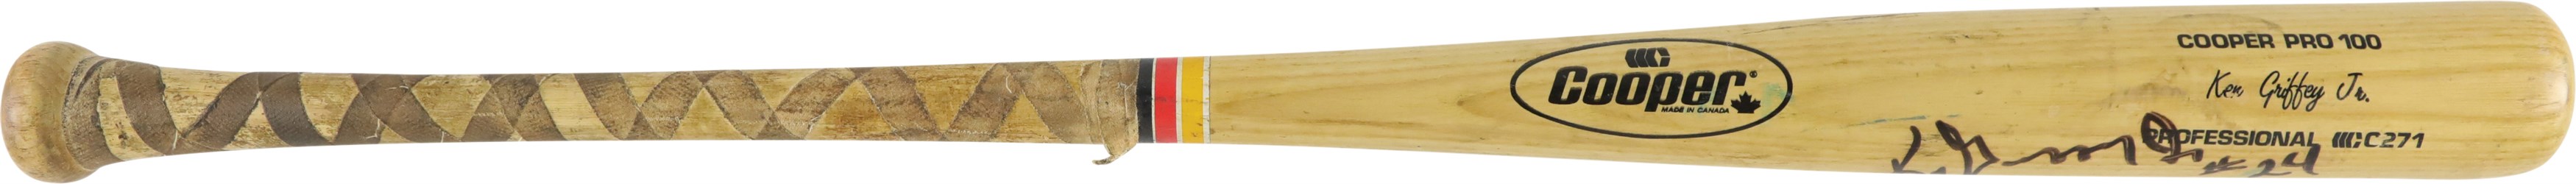 - 1989 Ken Griffey Jr. Rookie Seattle Mariners Signed Game Used Bat with Rookie Signature (PSA GU 9.5)